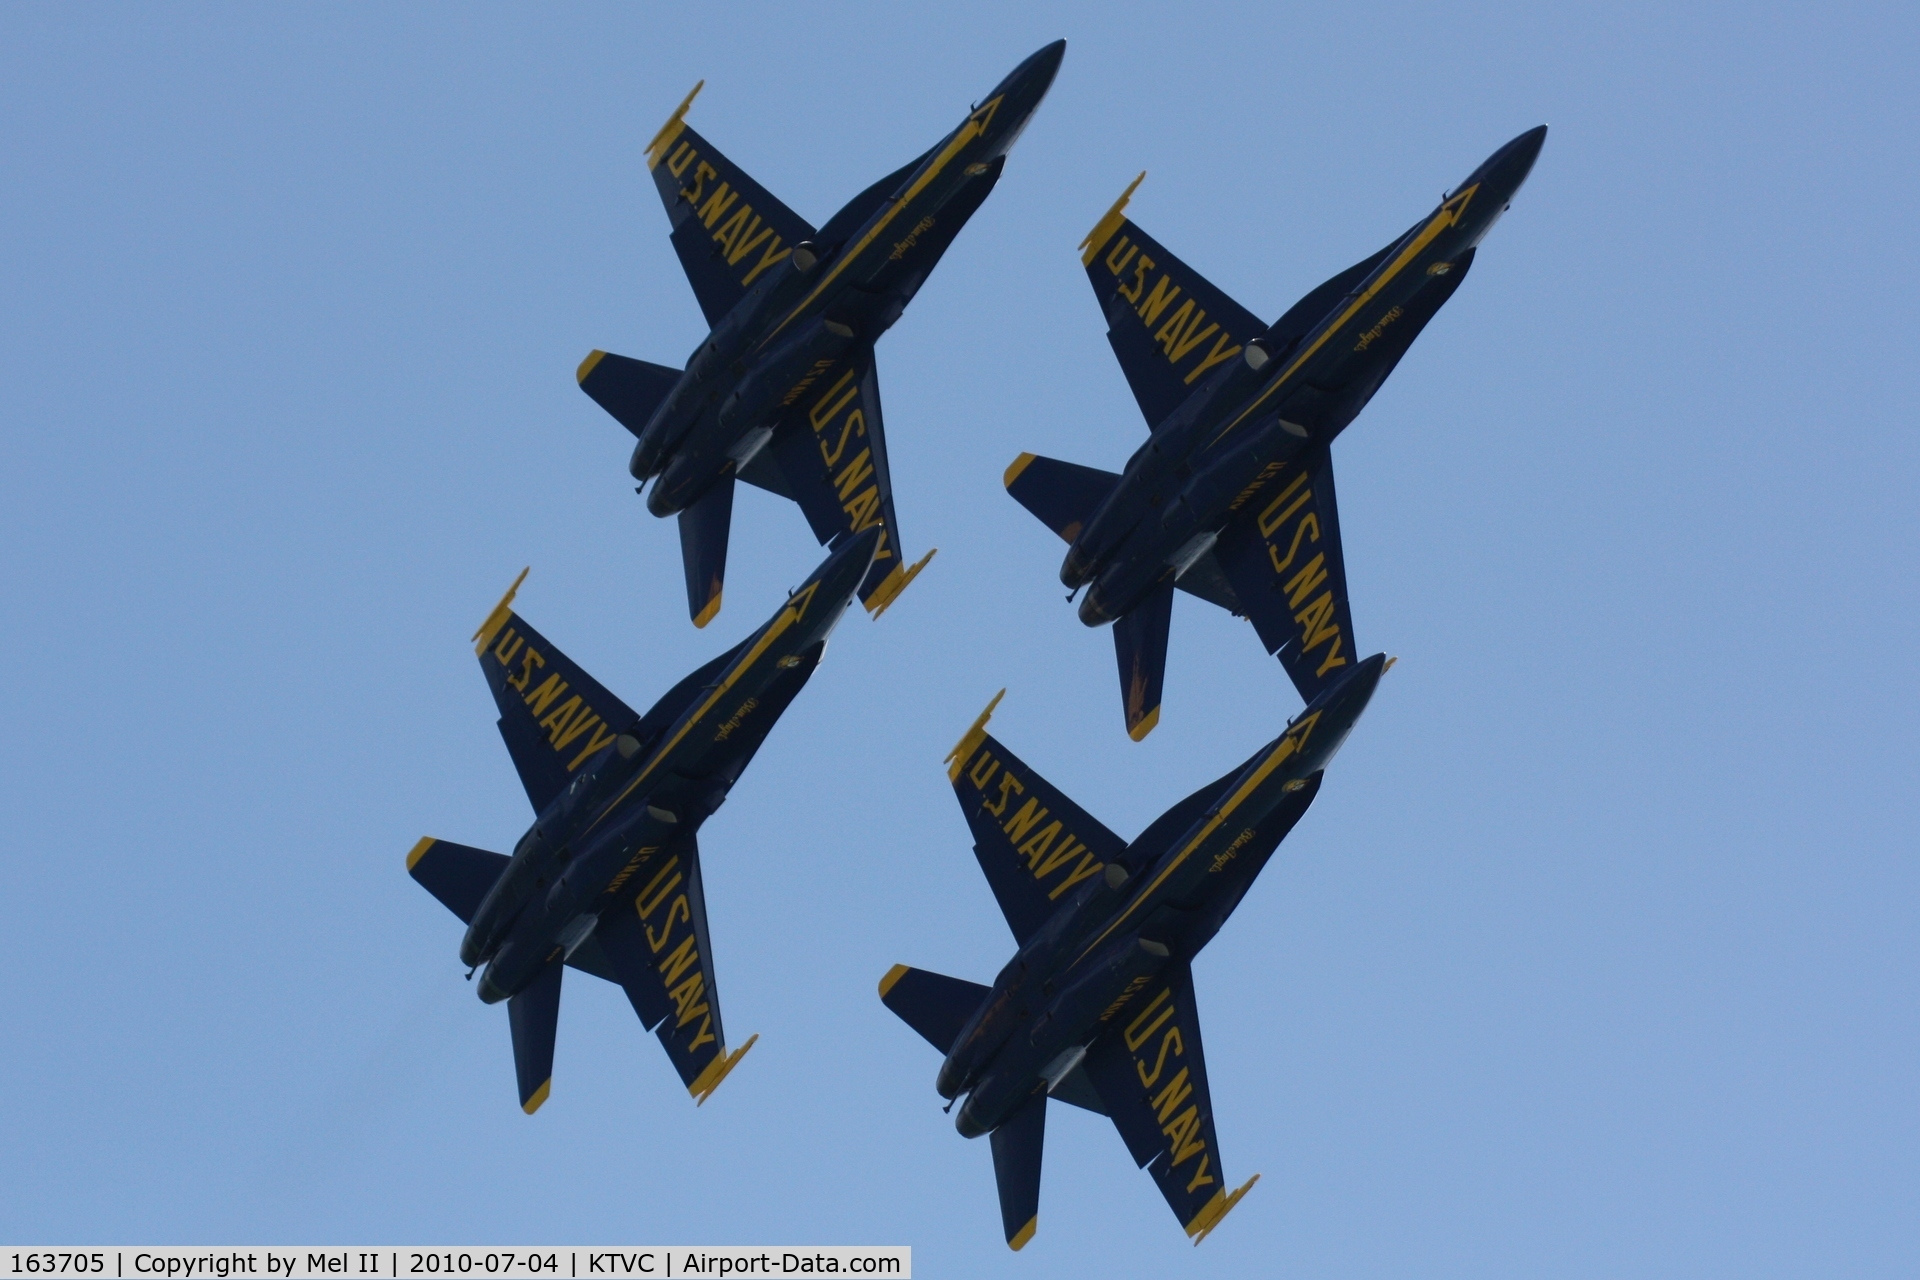 163705, 1988 McDonnell Douglas F/A-18C Hornet C/N 0767/C067, US Navy Blue Angels at the 2010 National Cherry Festival Air Show